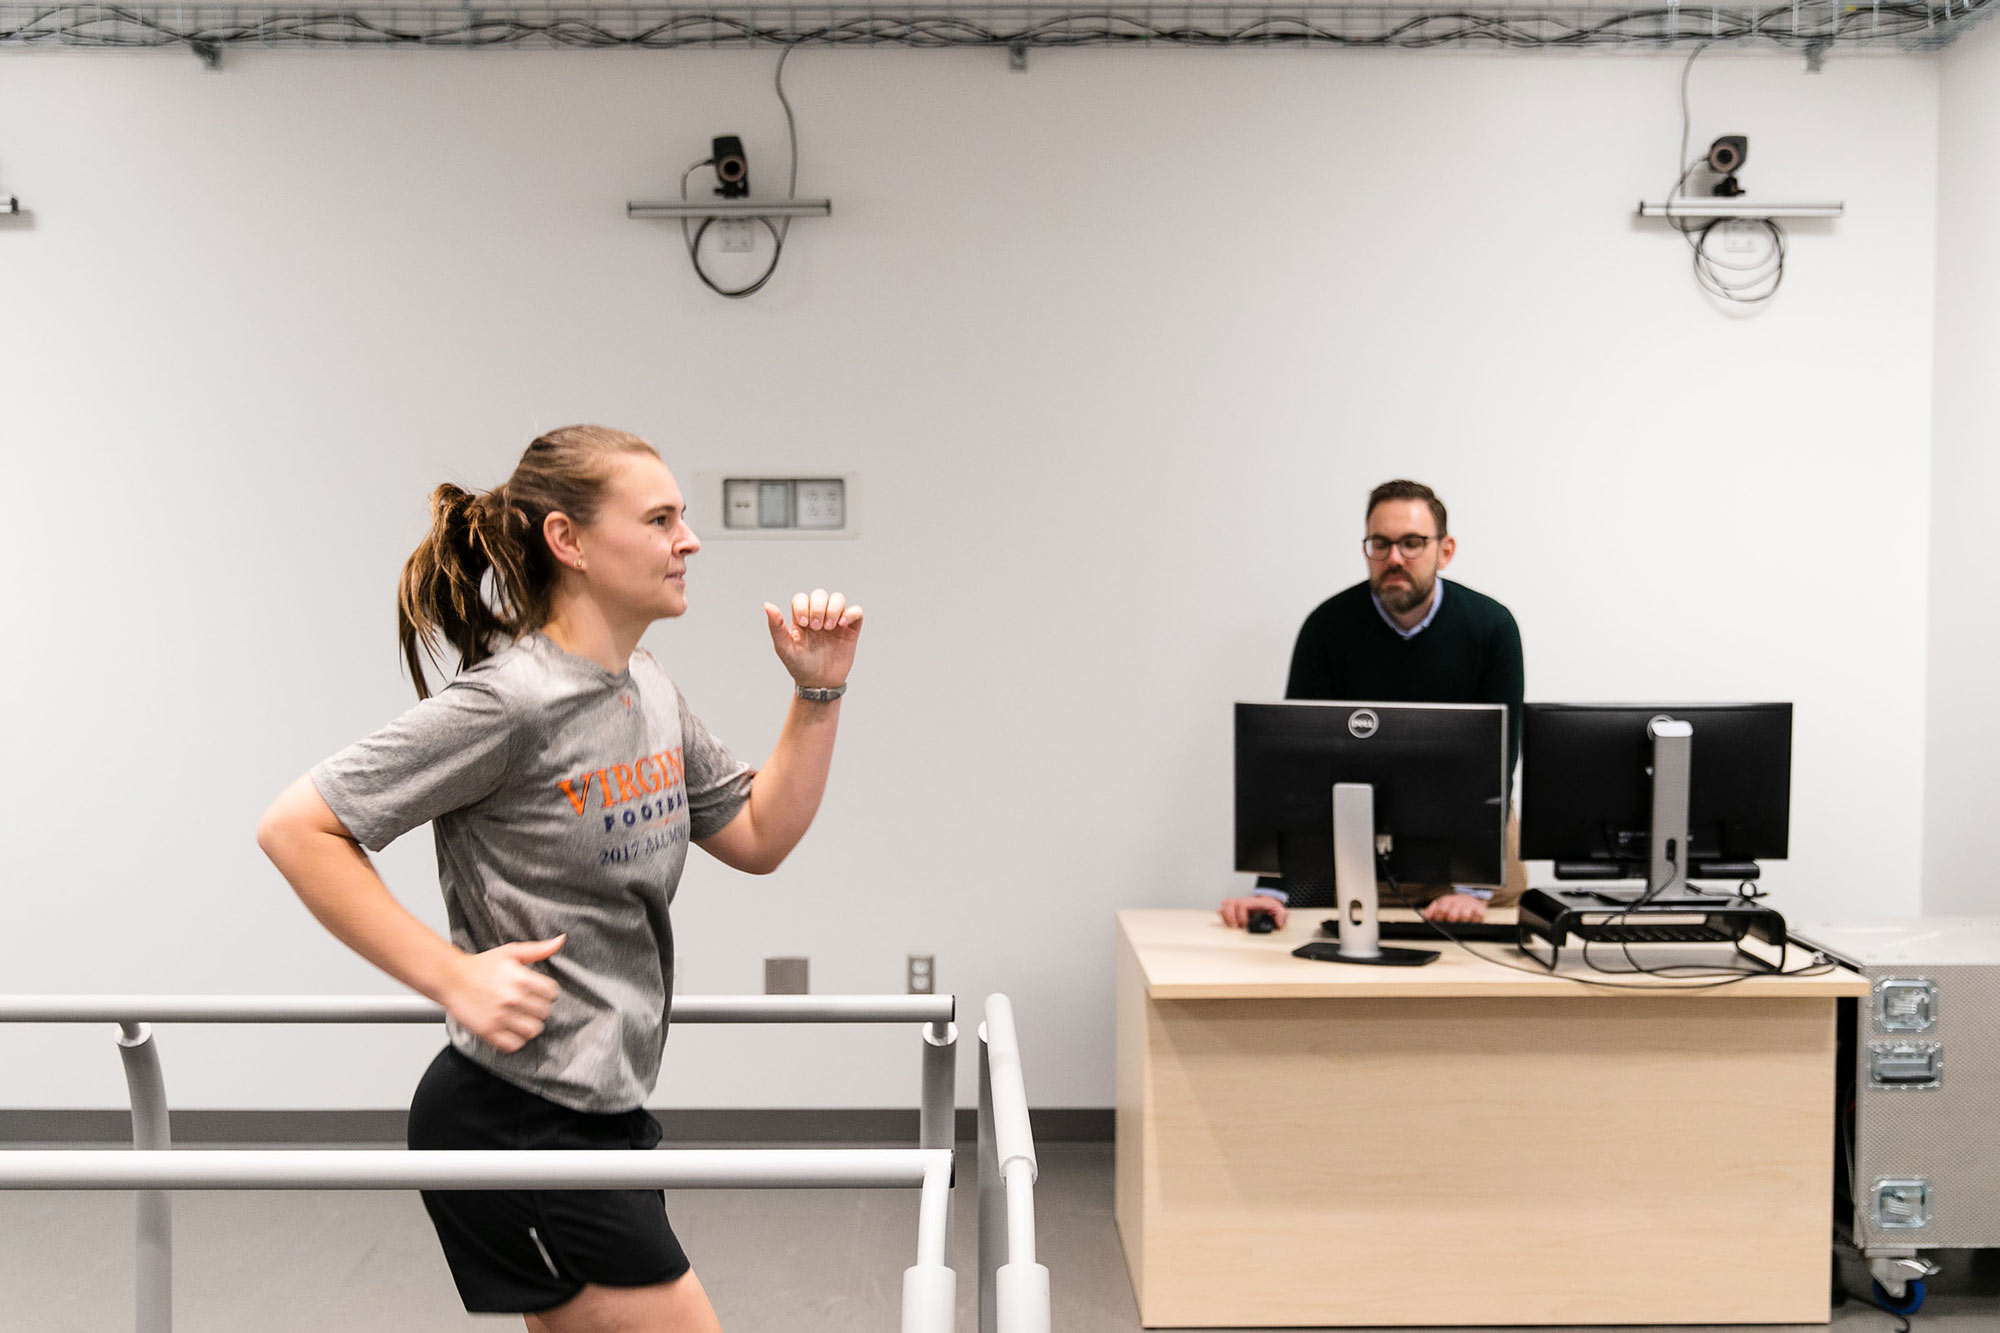 Candid of a participant on a treadmill with Chris Kuenze in the background monitoring the test results on a computer